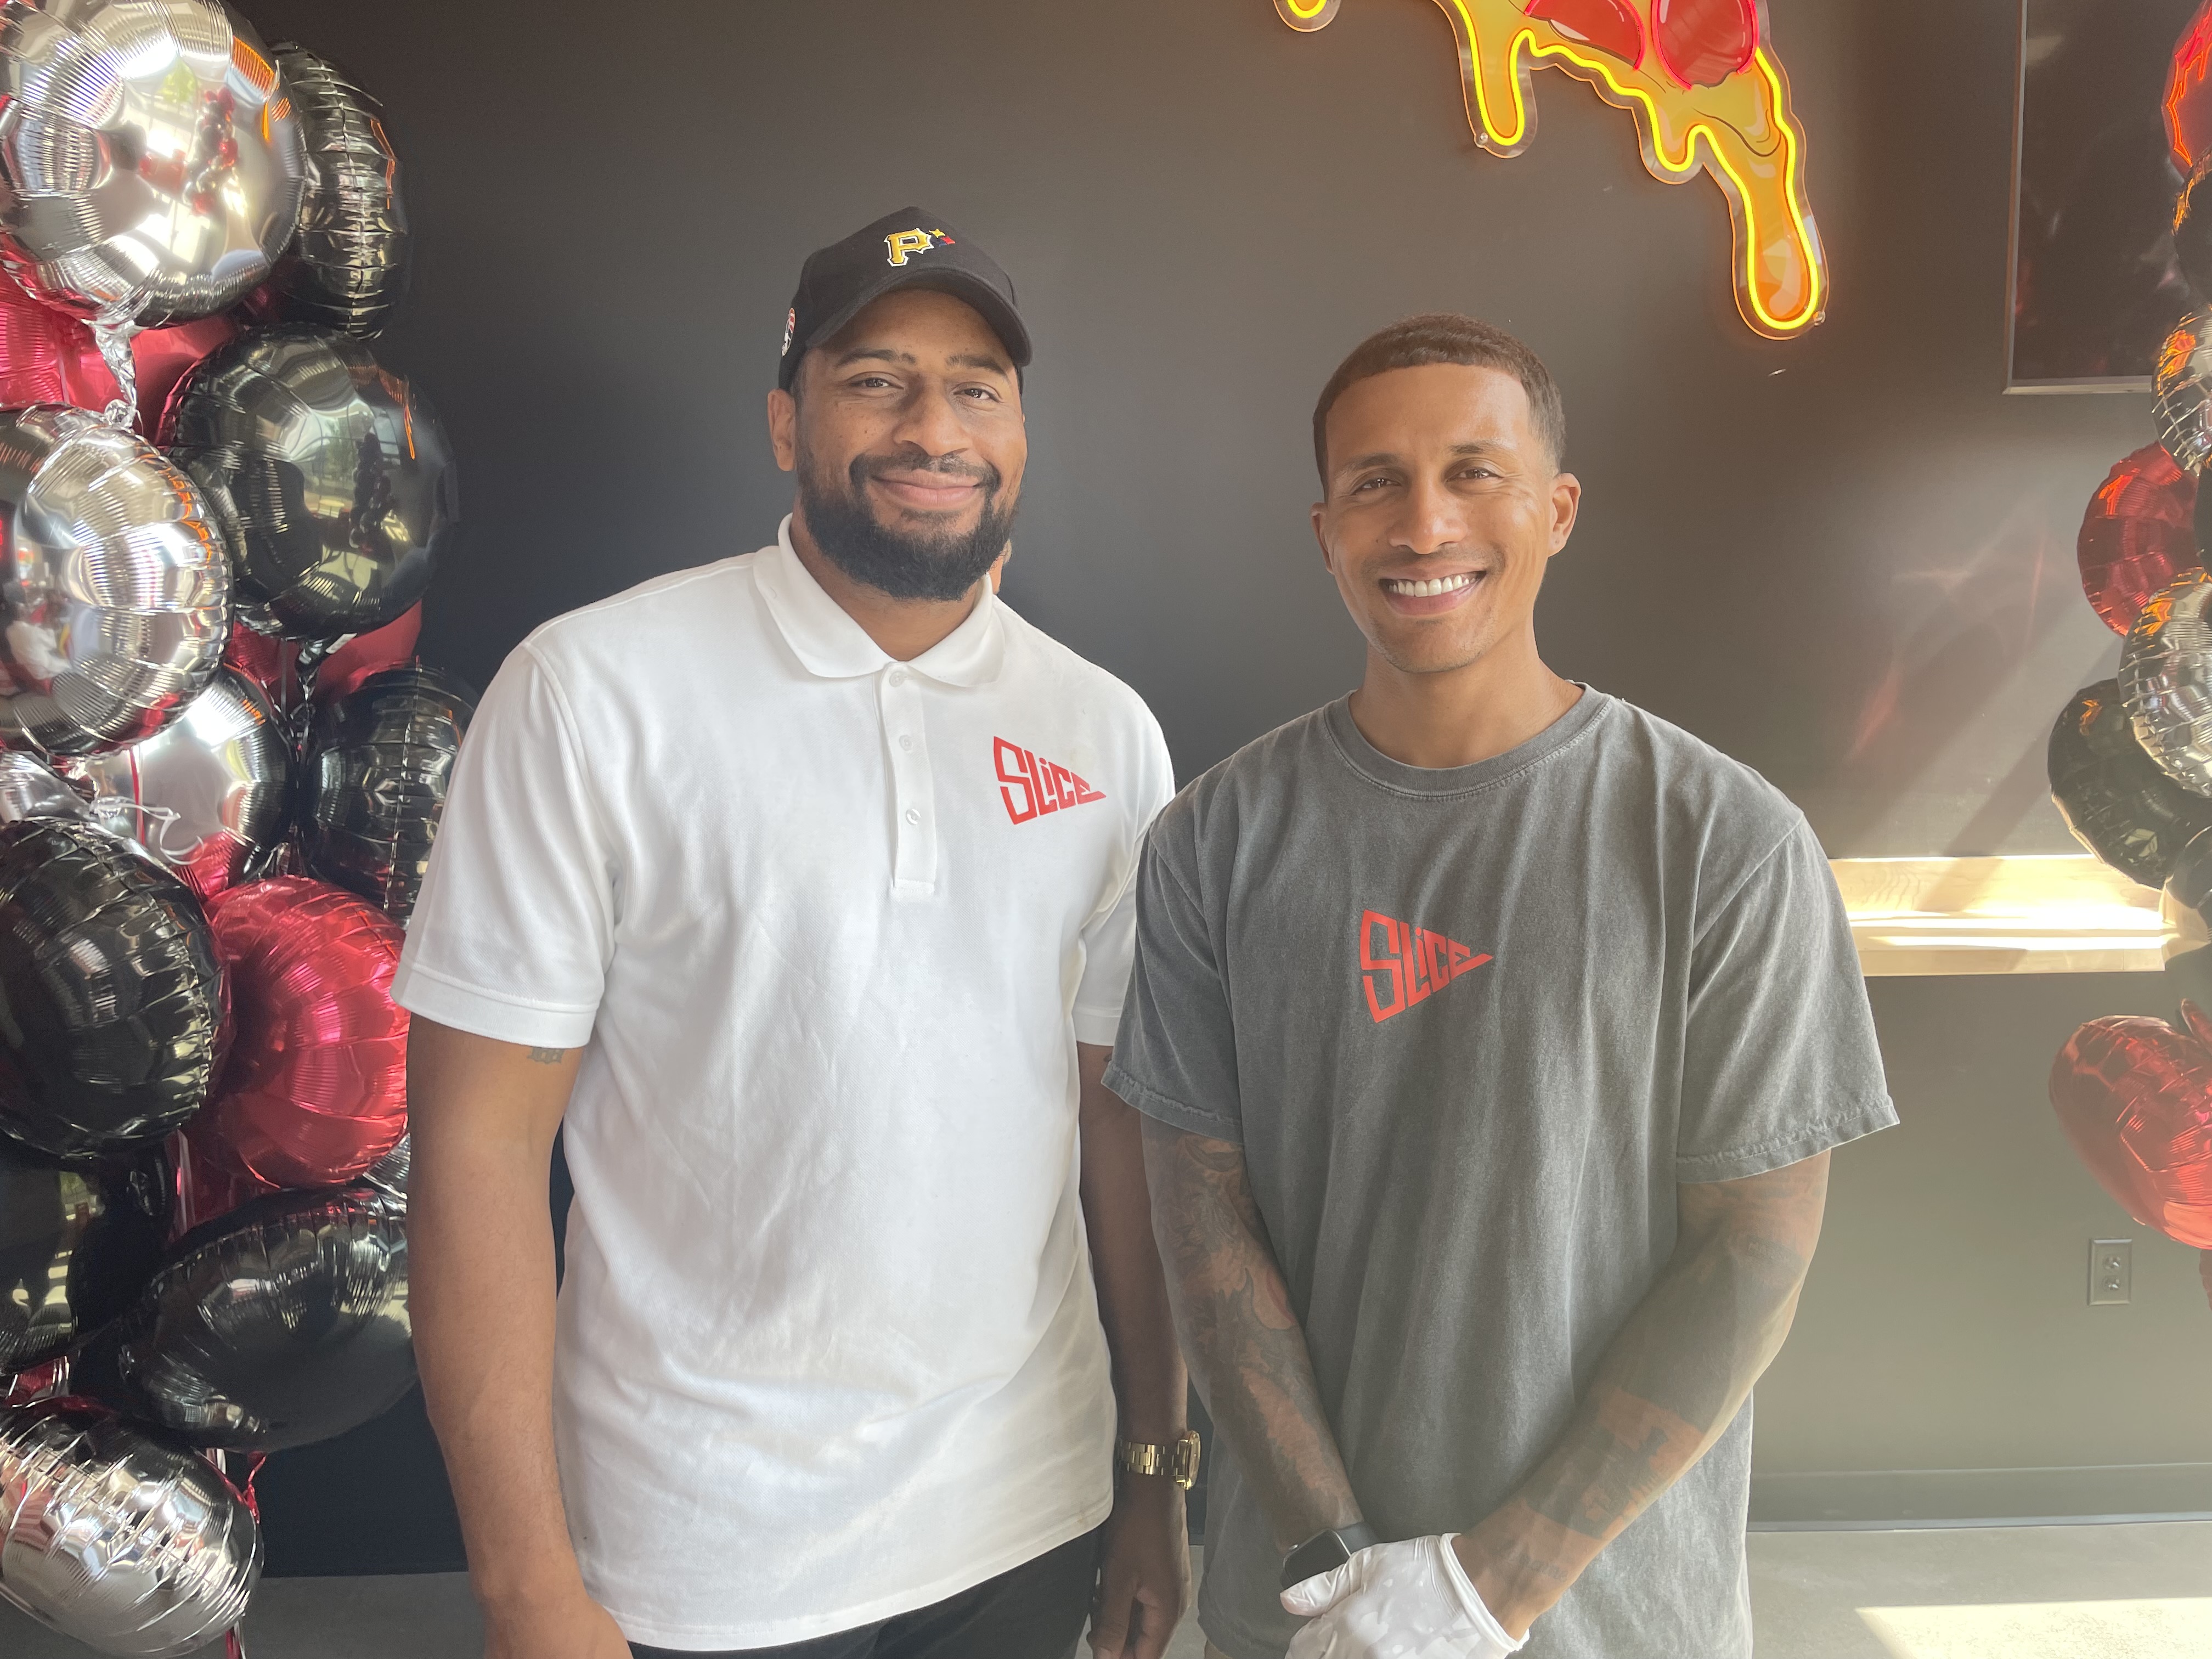 Owners Hosie Thurmond and Adam Kado wearing shirts with a small orange label that says “Slice” against a black wall with red, black, and silver balloons visible on either side. 